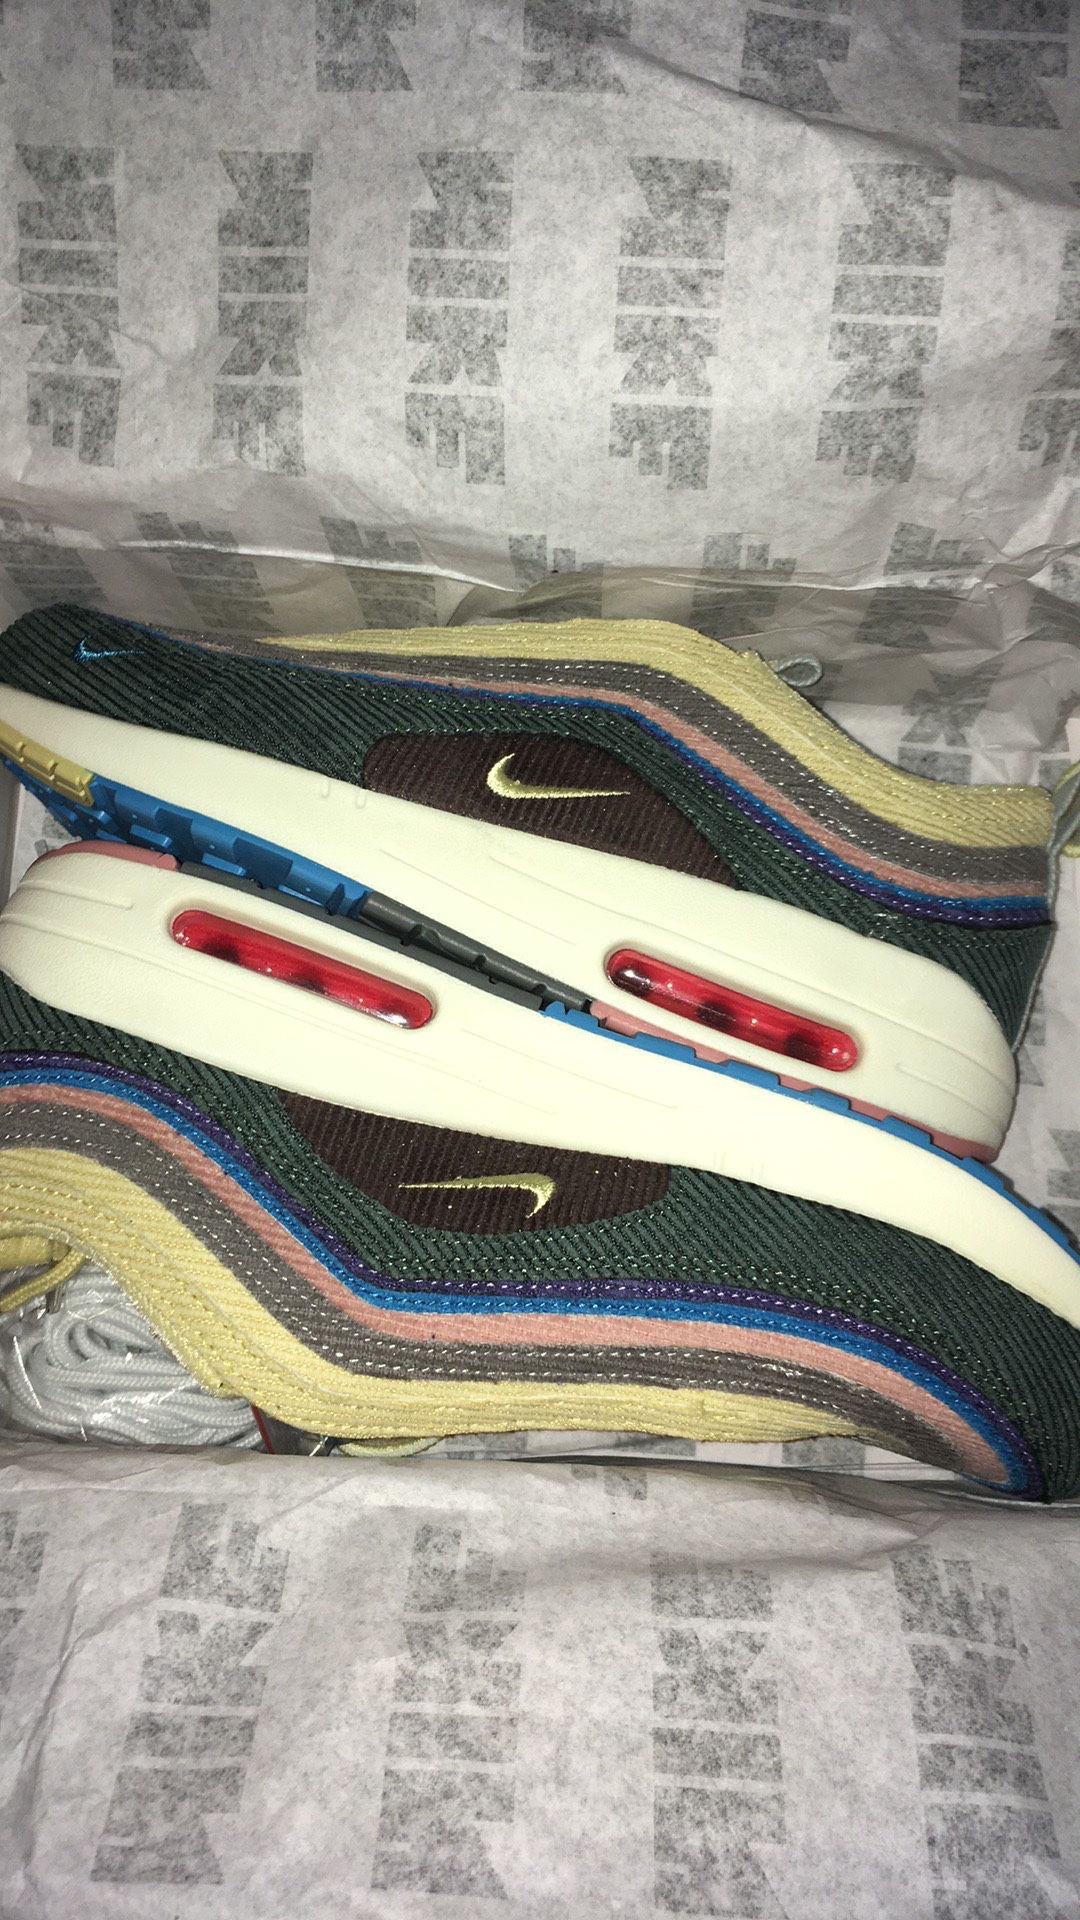 (PRICE DROP) Sean wotherspoon airmax 97